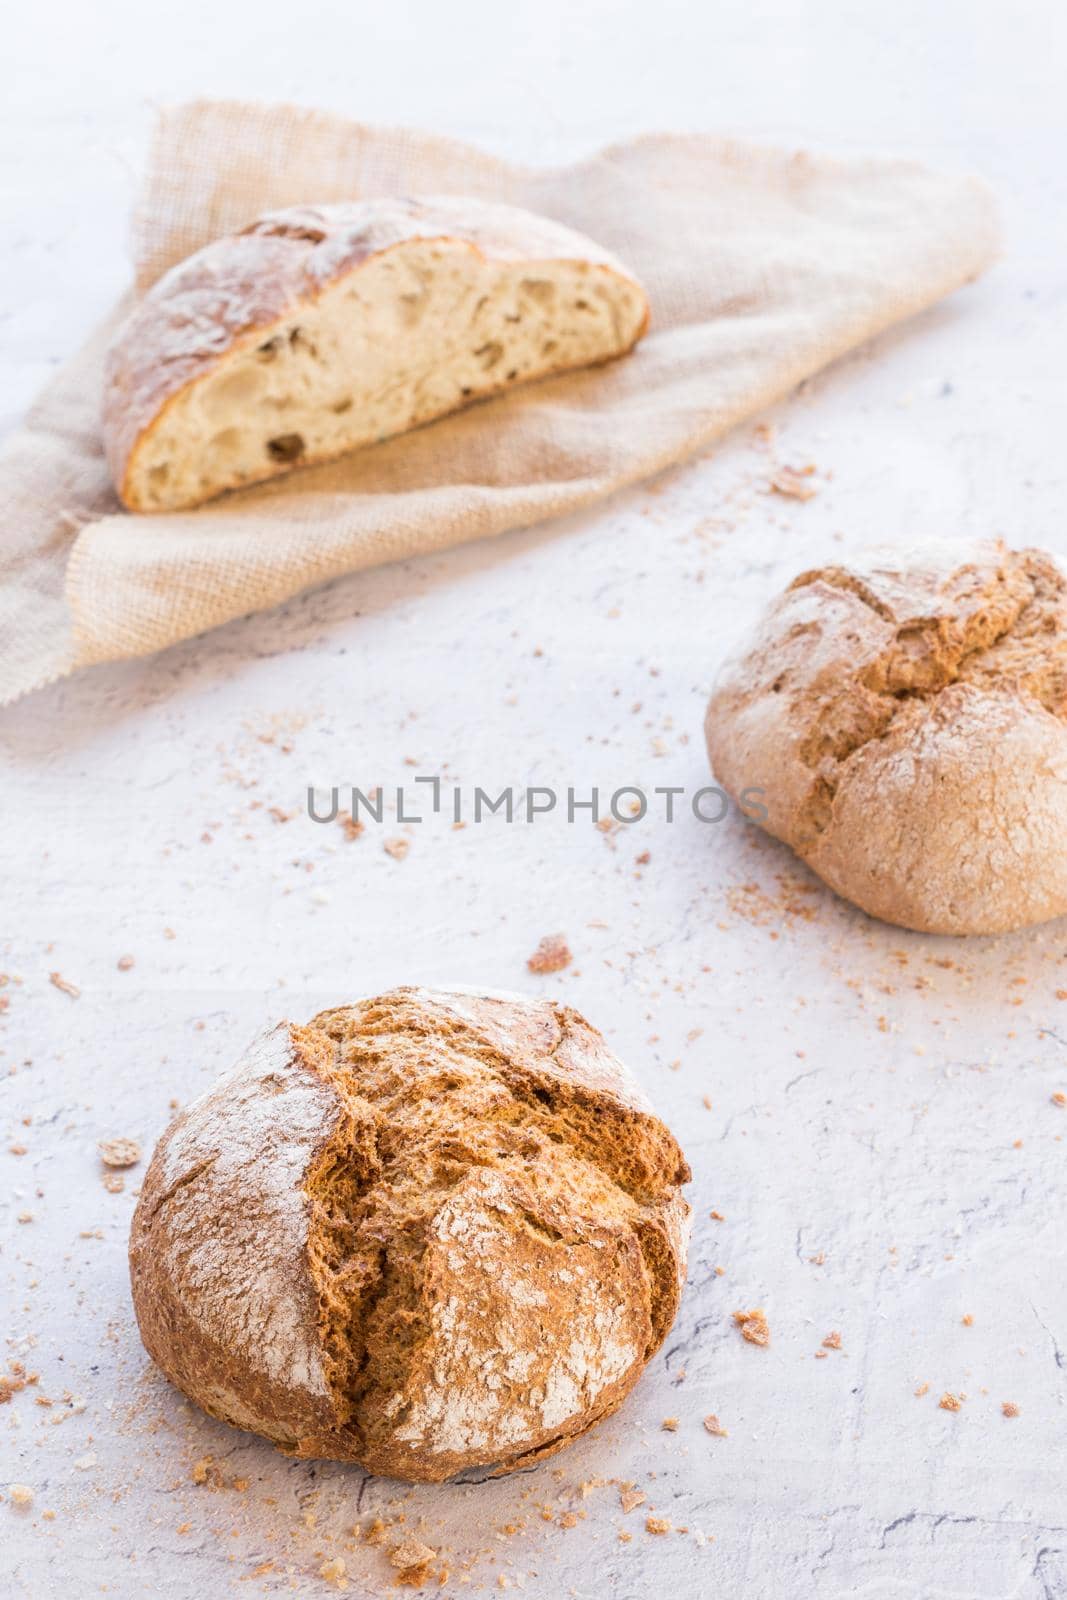 image at forty-five degrees vertically of three ecological rustic breads distributed in the shape of a triangle on a white surface and a beige cloth surrounded by crumbs with natural light